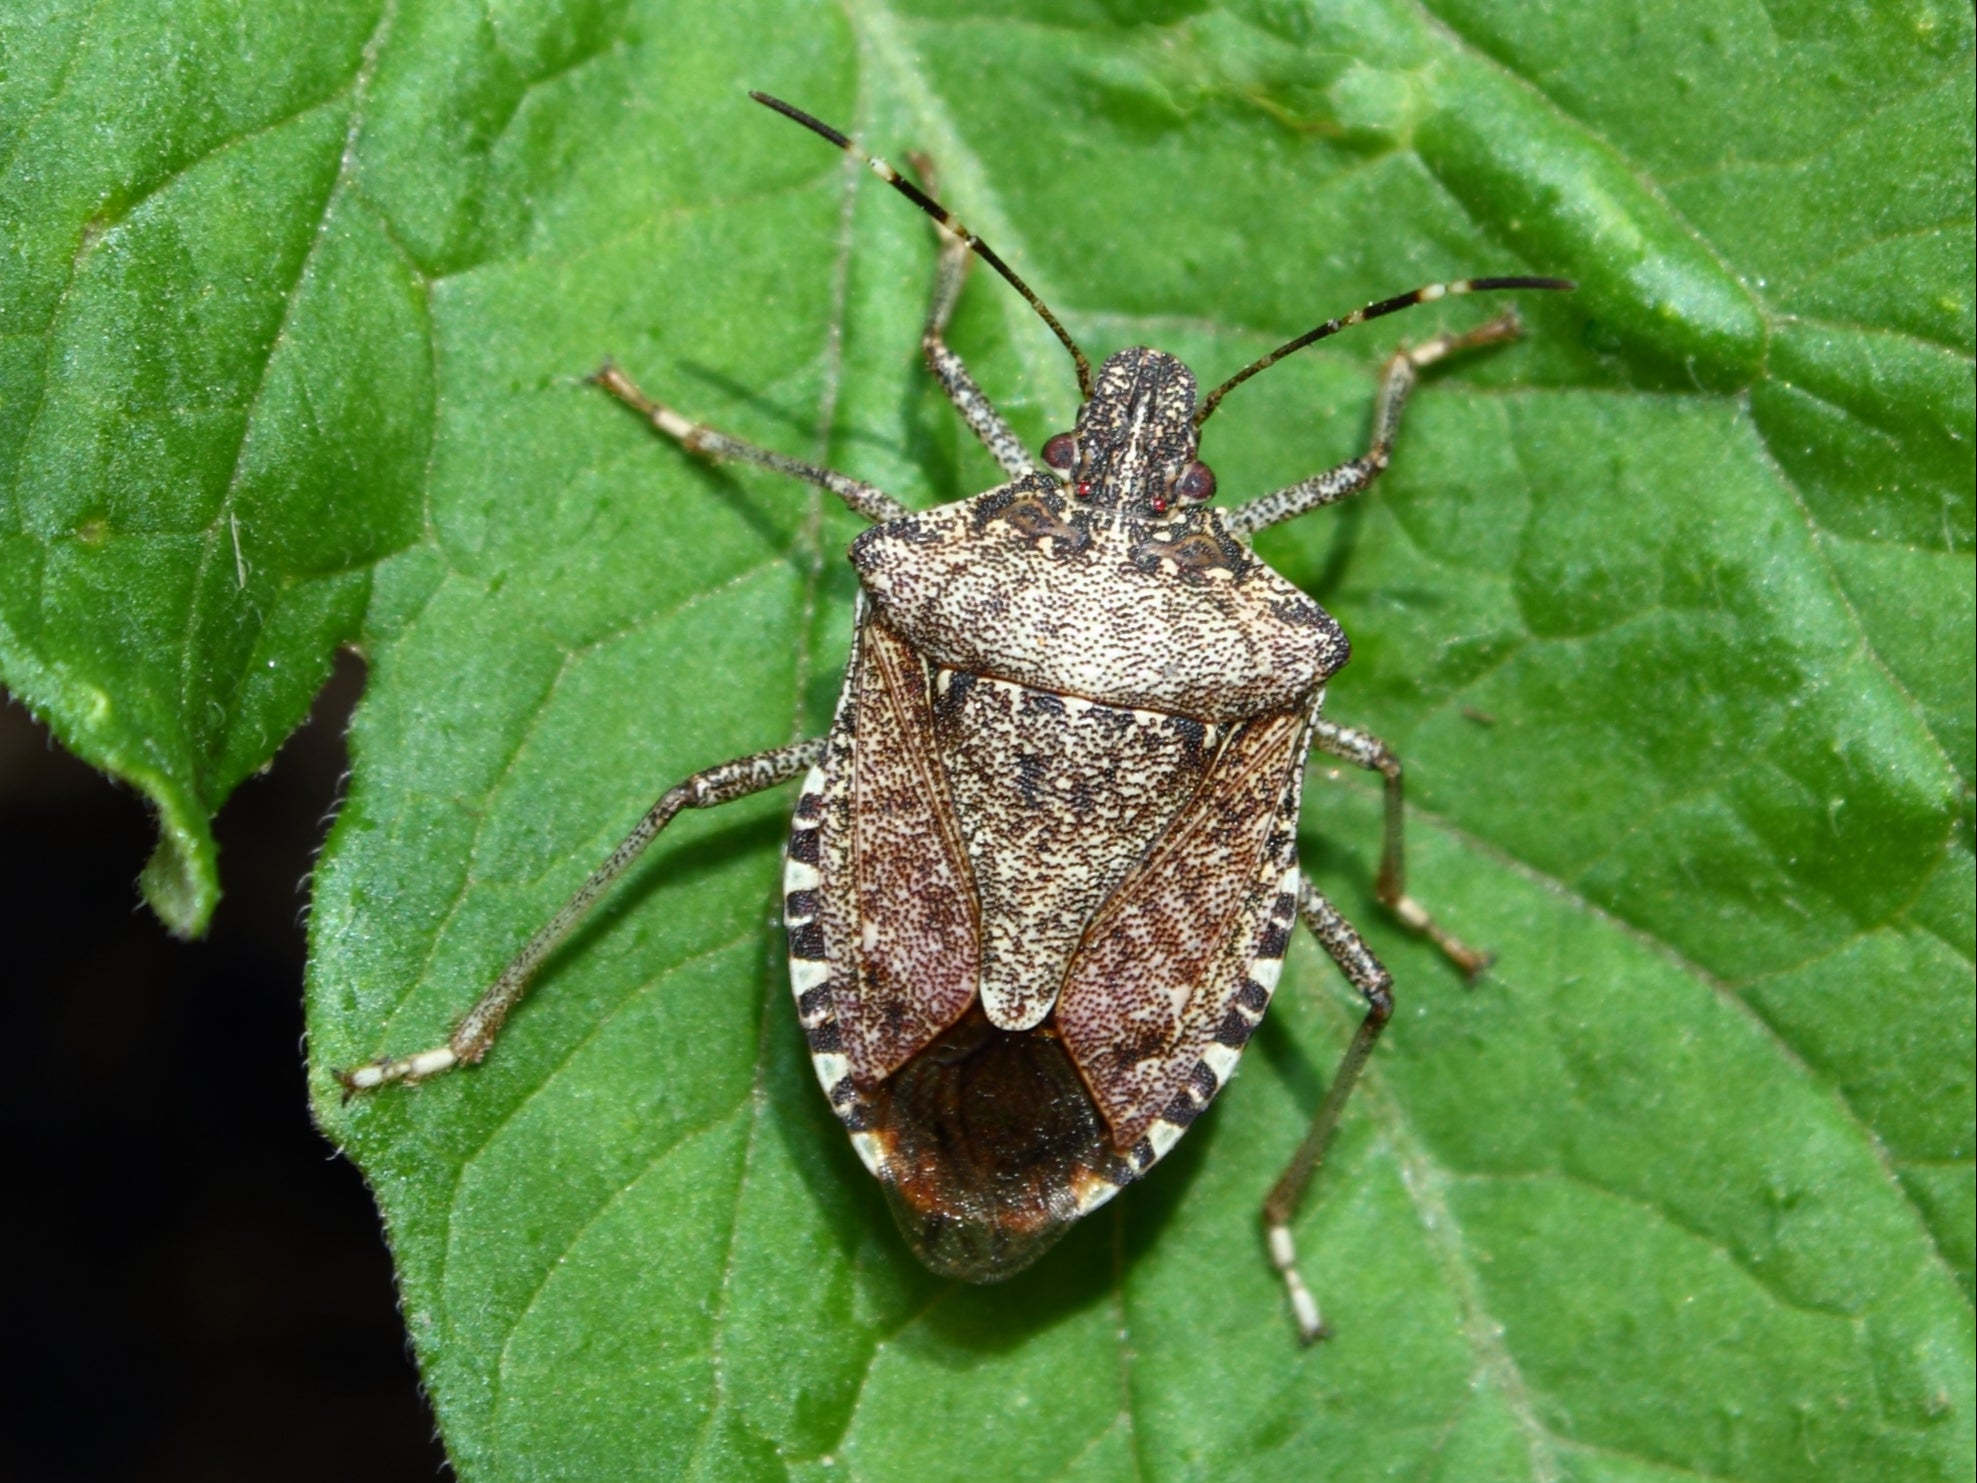 Stink bugs are named after the foul smell they release when threatened